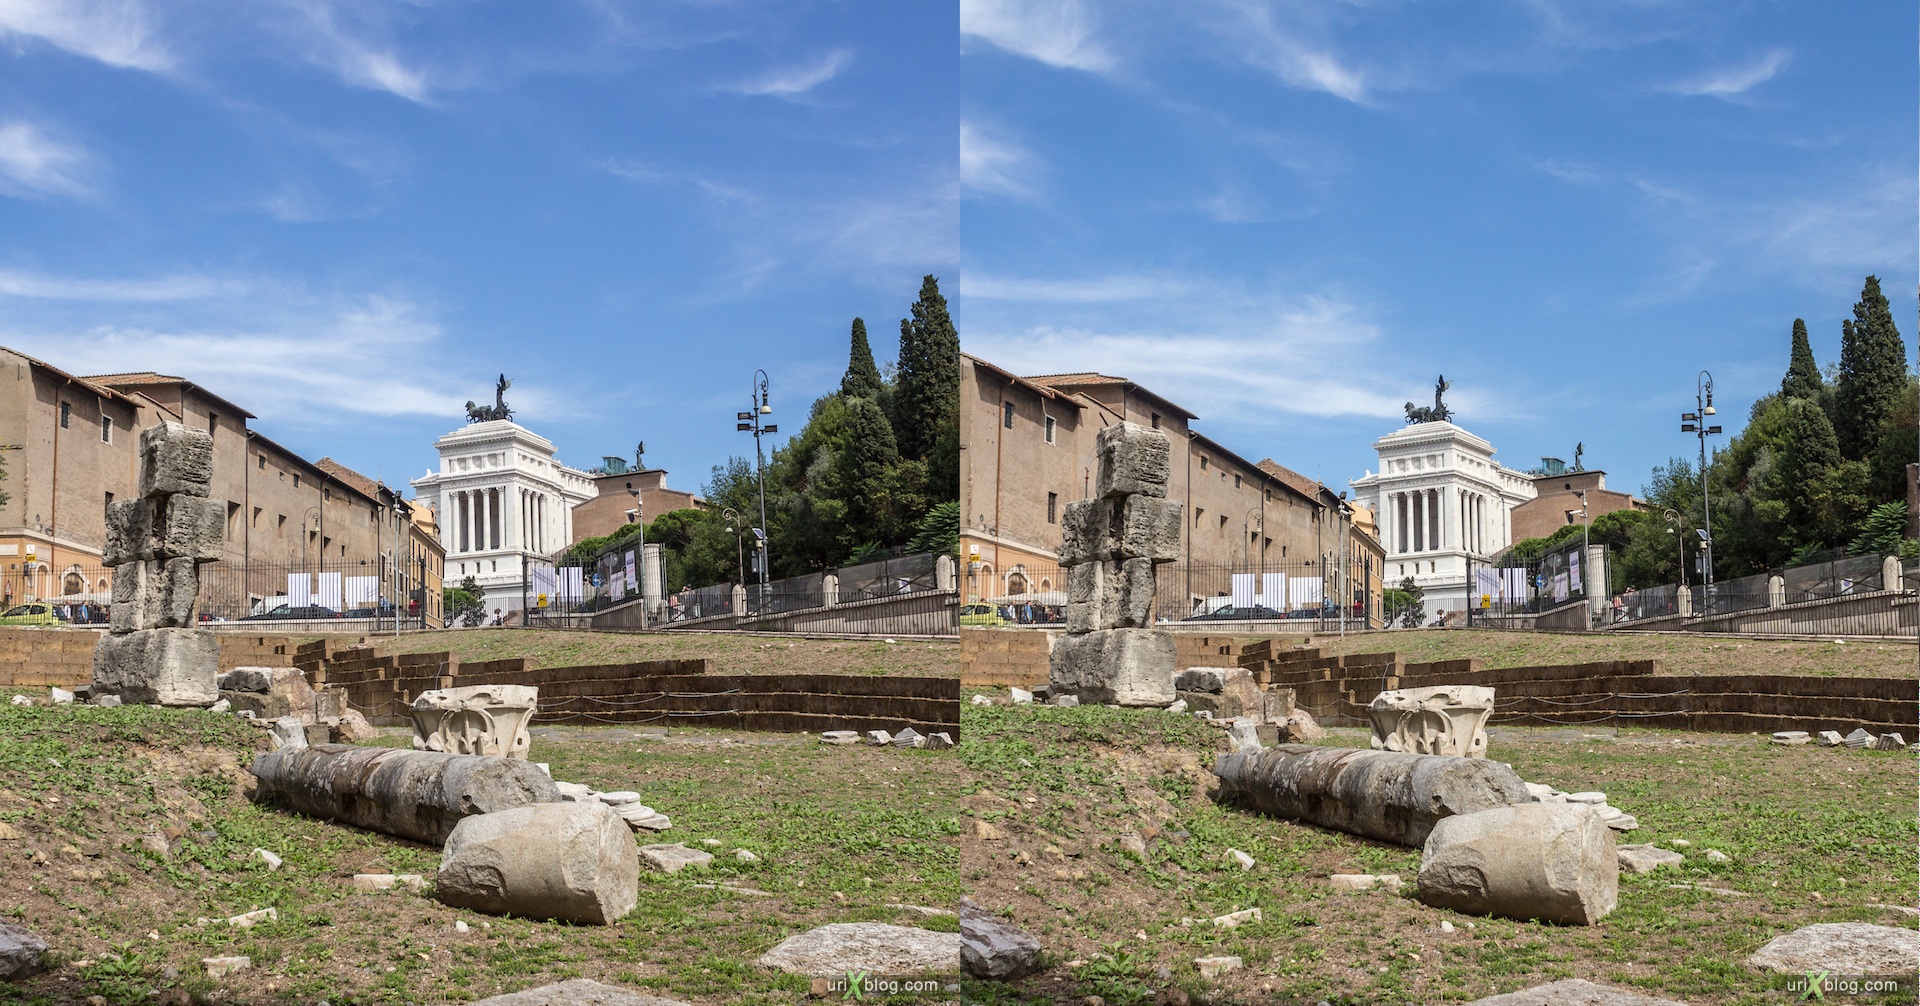 2012, Temple of Bellona, Theater of Marcellus, Vittoriano, Rome, Italy, 3D, stereo pair, cross-eyed, crossview, cross view stereo pair